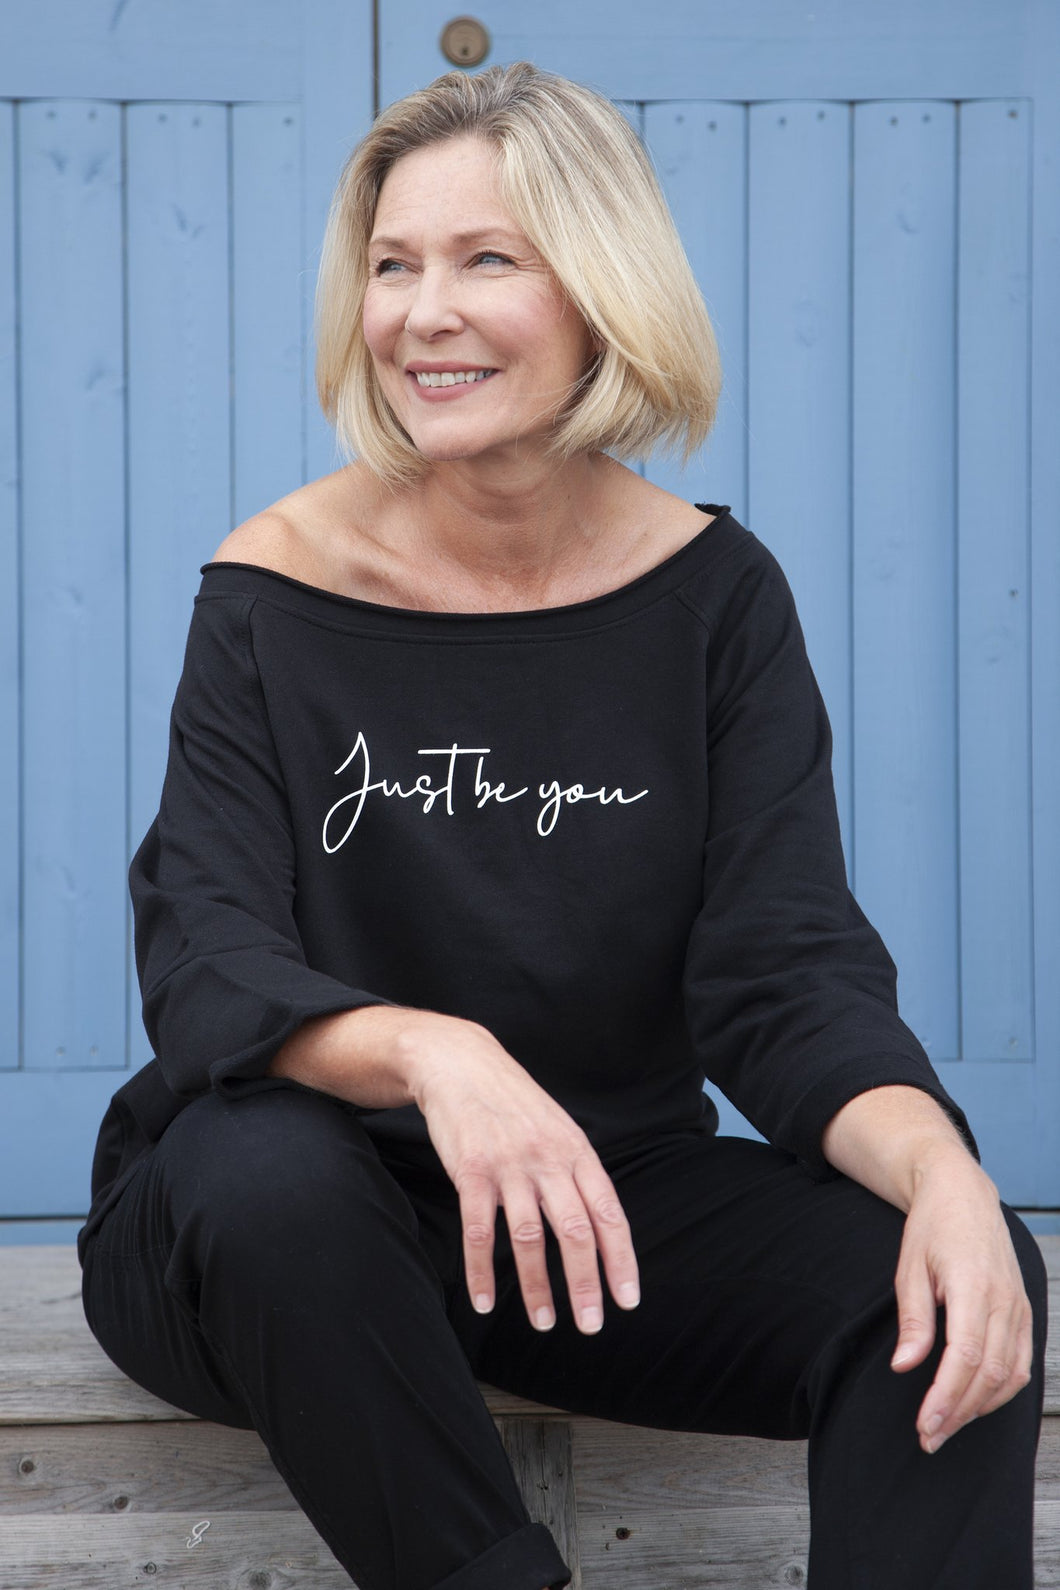 ‘Just be you' Women’s Oversized Black Sweater